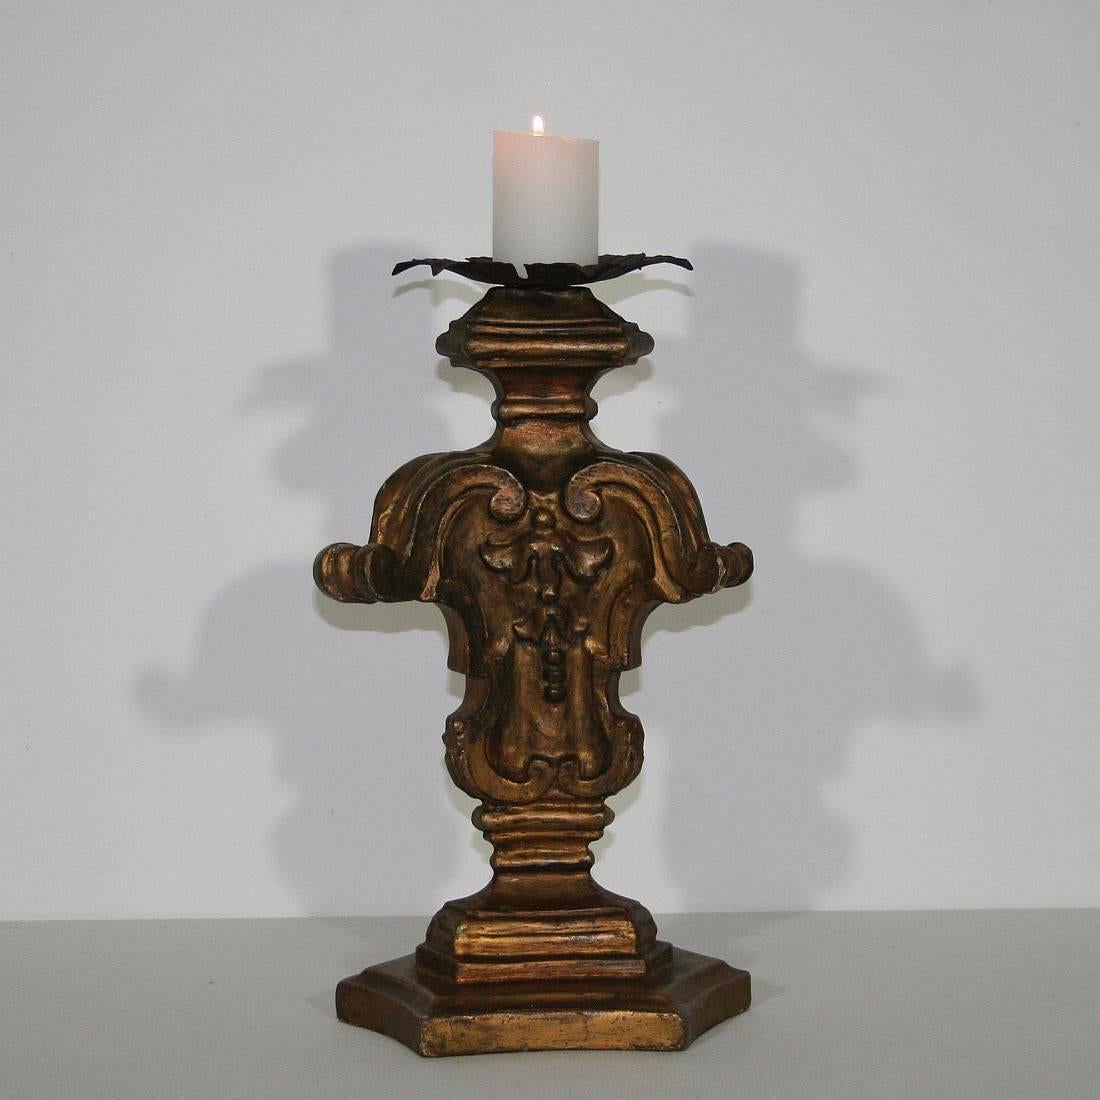 Carved wooden Baroque candleholder,
Italy, circa 1750. Weathered, small losses.